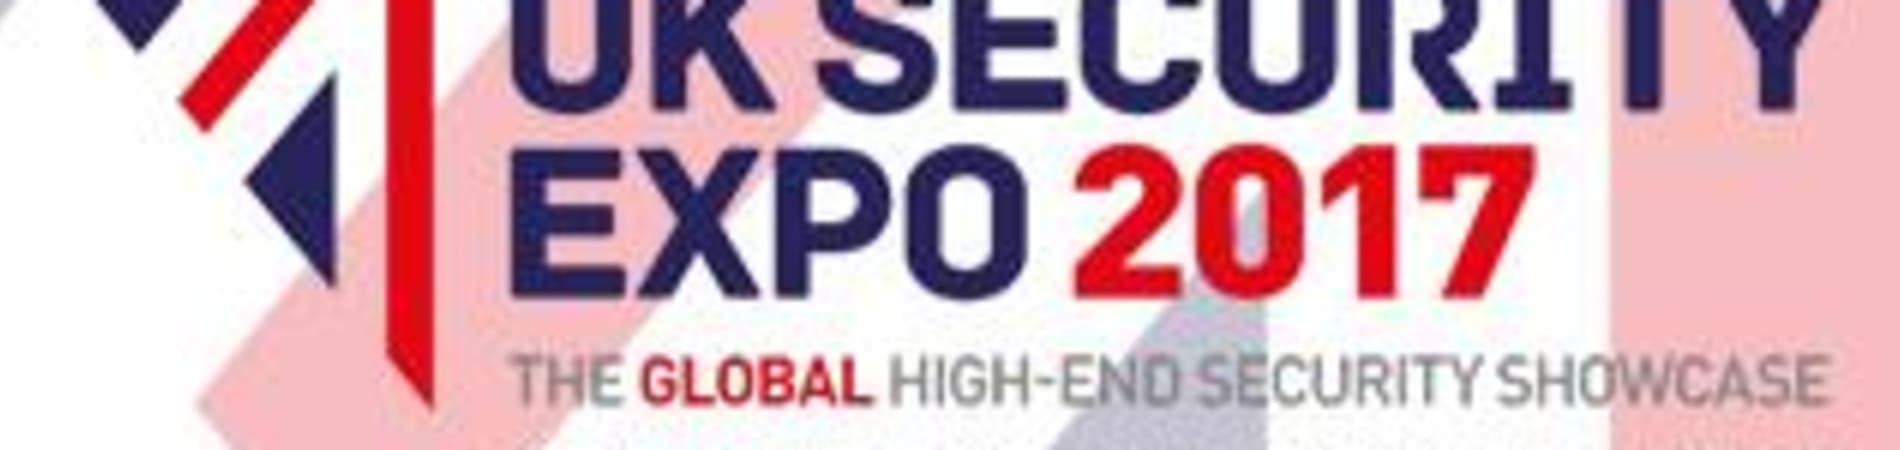 Marshalls to Exhibit Landscape Protection Offer at UK Security Expo